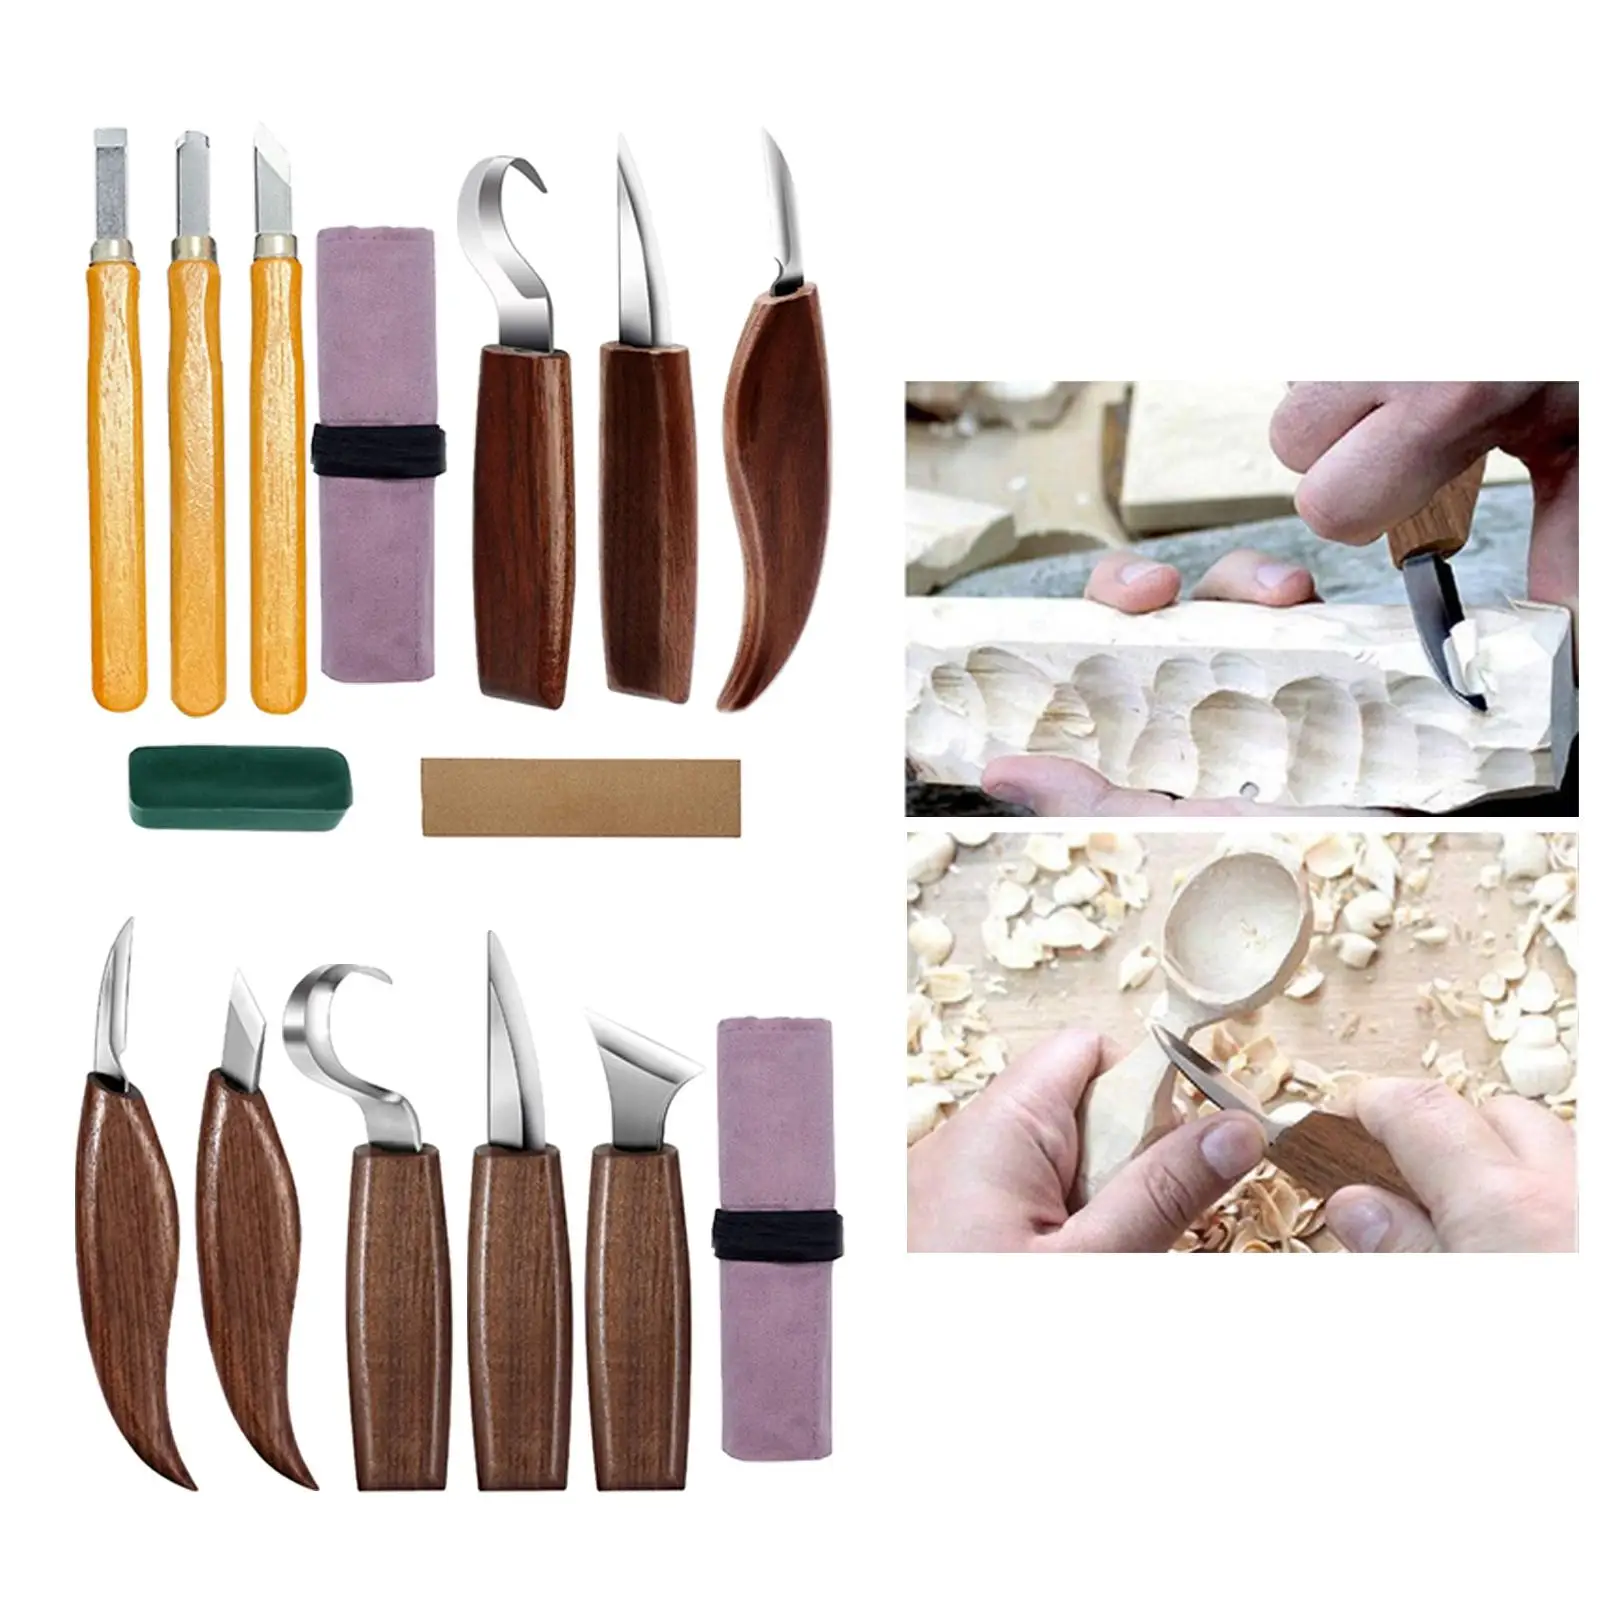 Professional Wood Carving Tools Set Woodworking Hook Carving Knife Hand Tool Crafts Detail Cutter DIY Beginners Kids Adults